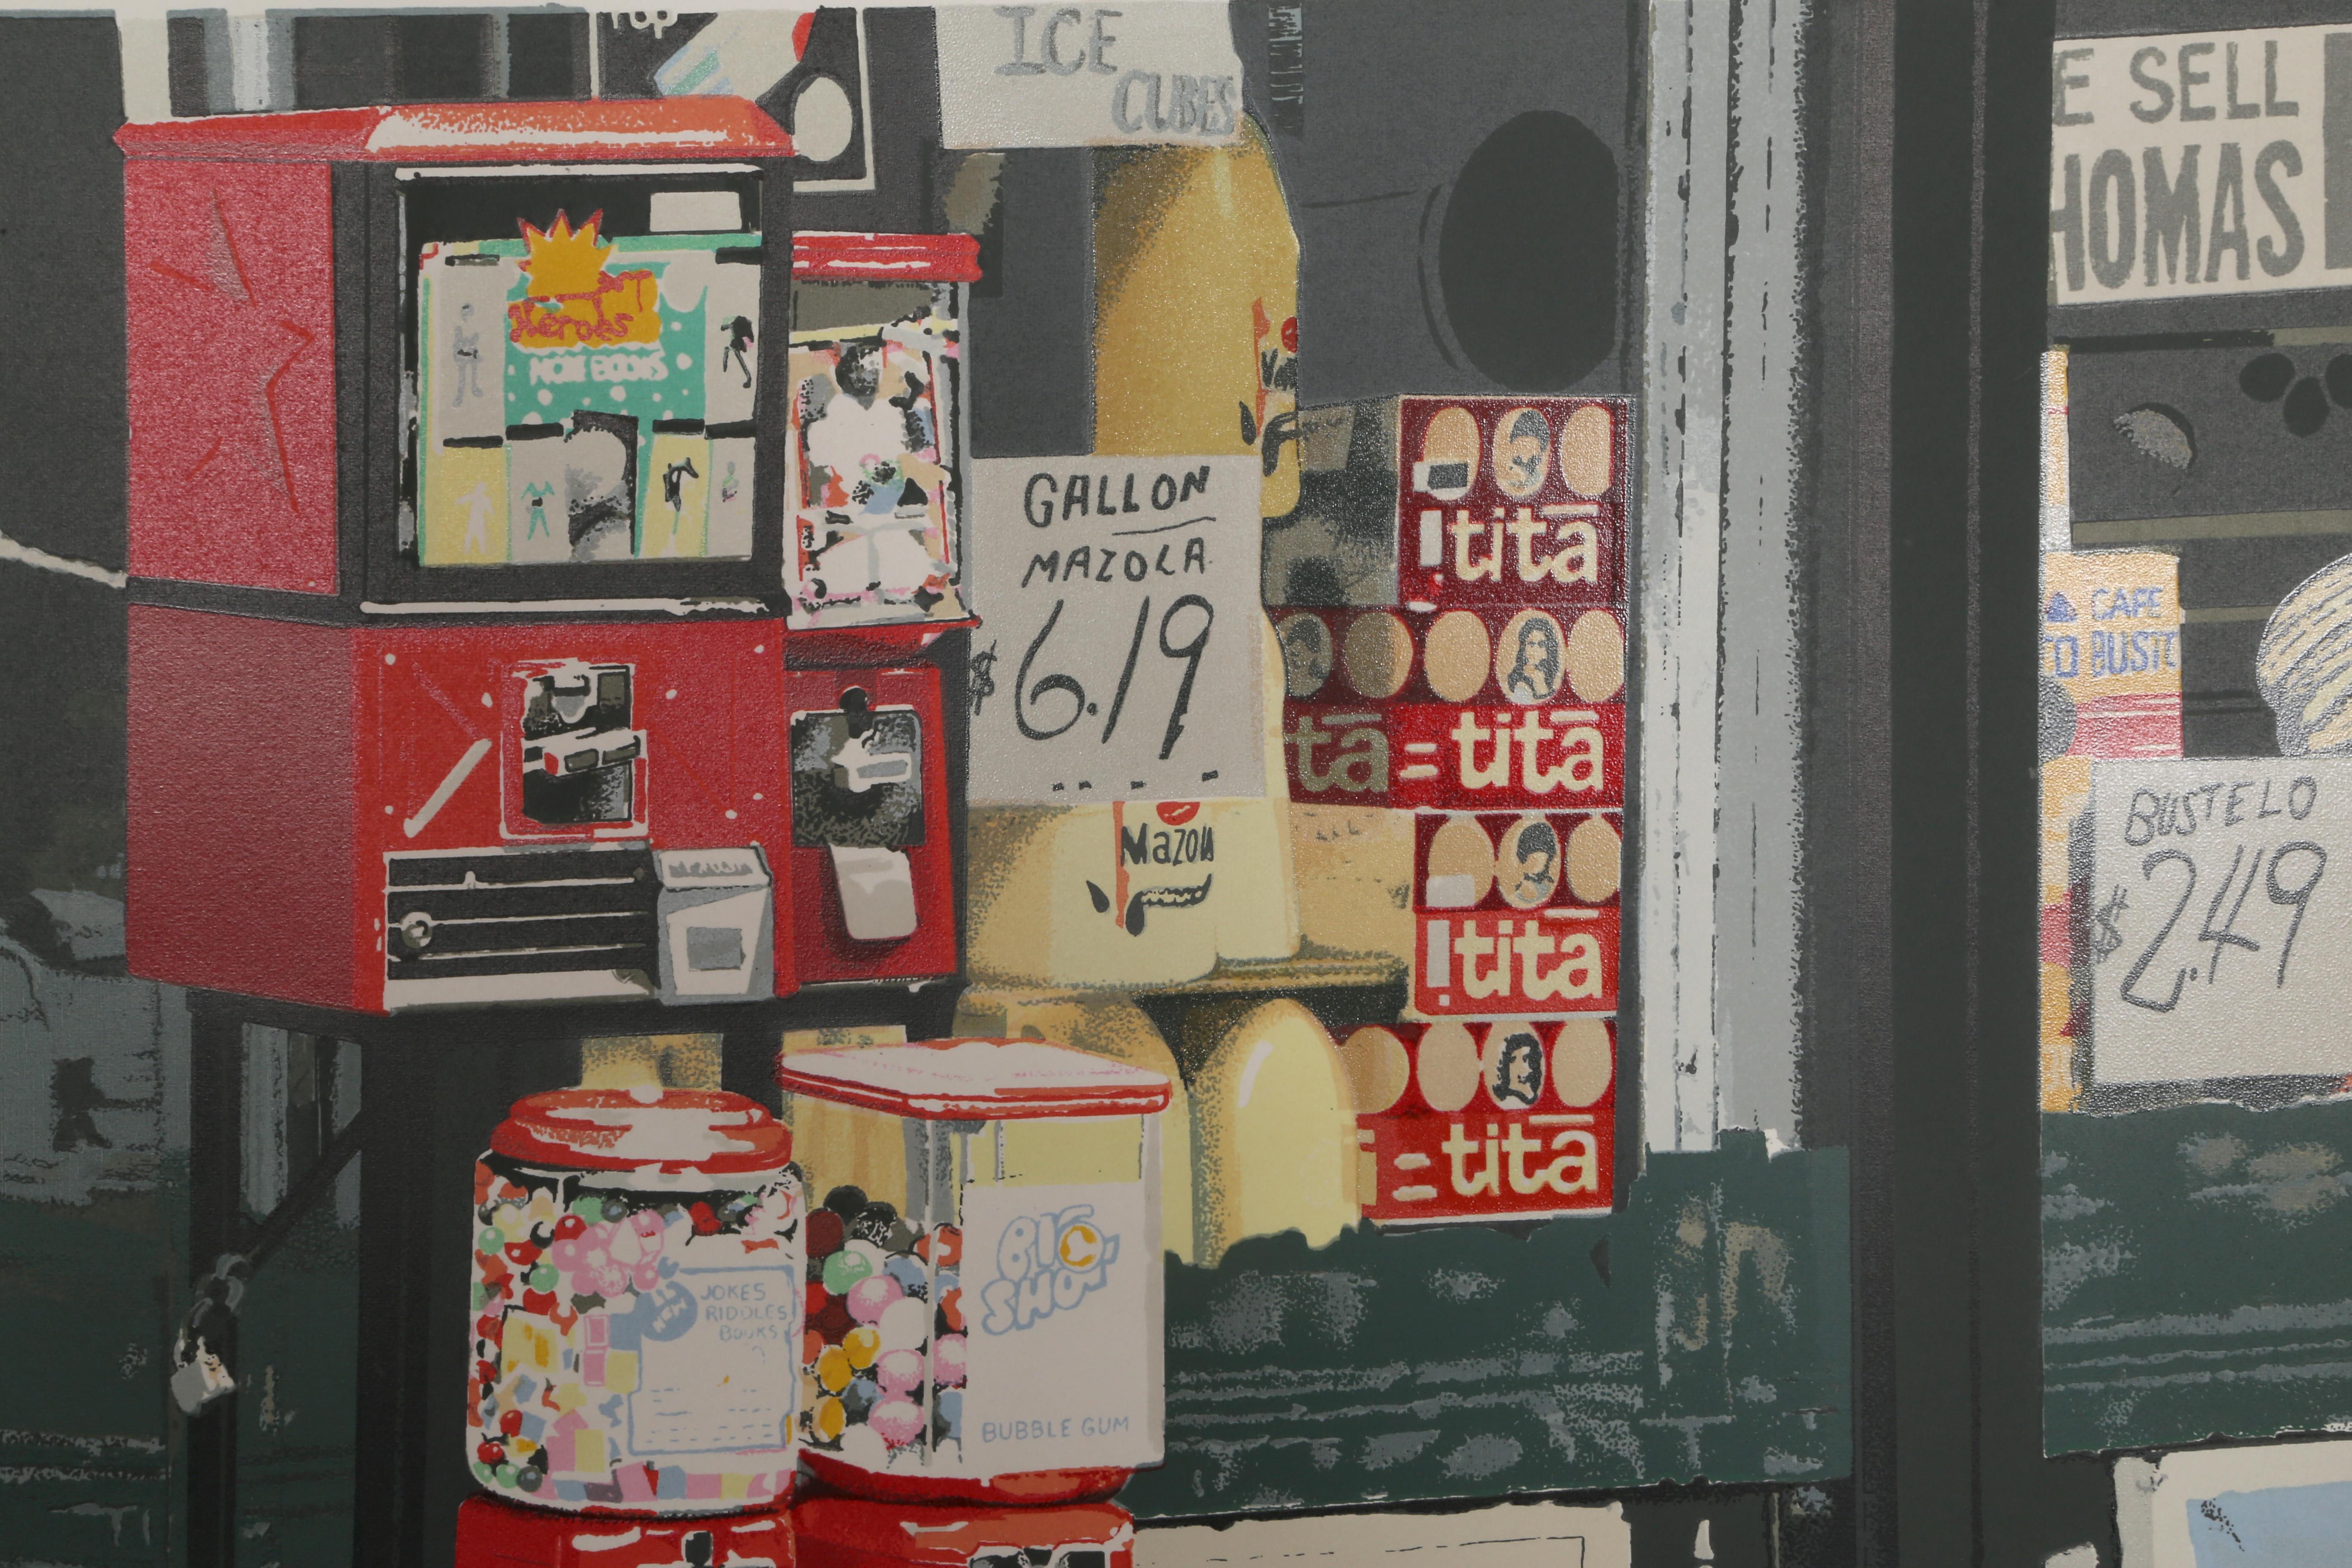 Artist: Charles Bell, American (1935 - 1995)
Title: Little Italy
Year: 1981
Medium: Silkscreen on White Somerset Satin, signed and numbered in pencil
Edition:  250, 30 AP
Image Size: 18 x 26 inches
Size: 22 in. x 30 in. (55.88 cm x 76.2 cm)